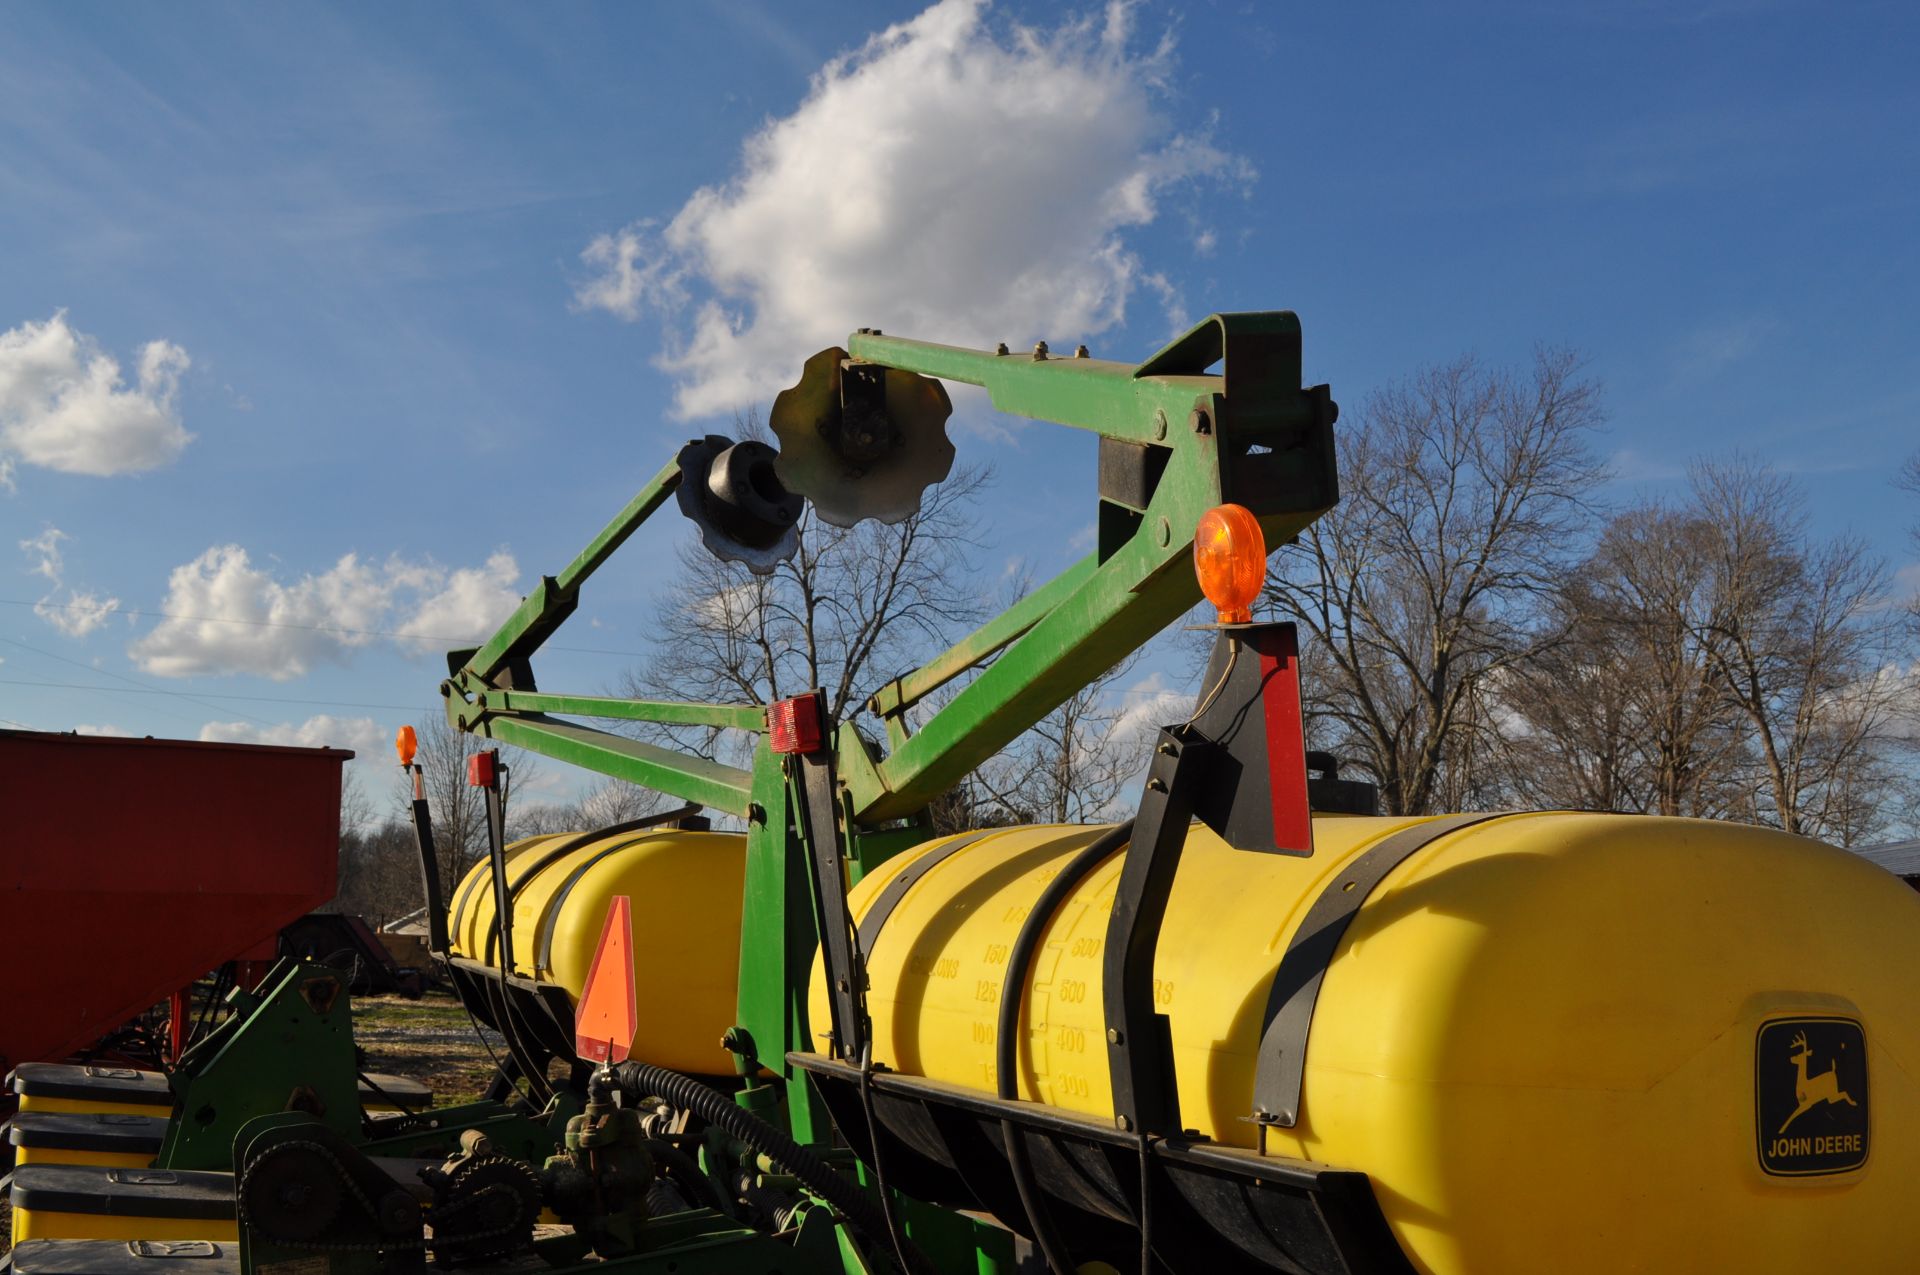 John Deere 1760 conservation planter, 12 row x 30”, hyd front fold, on row seed boxes, spring DP - Image 11 of 17